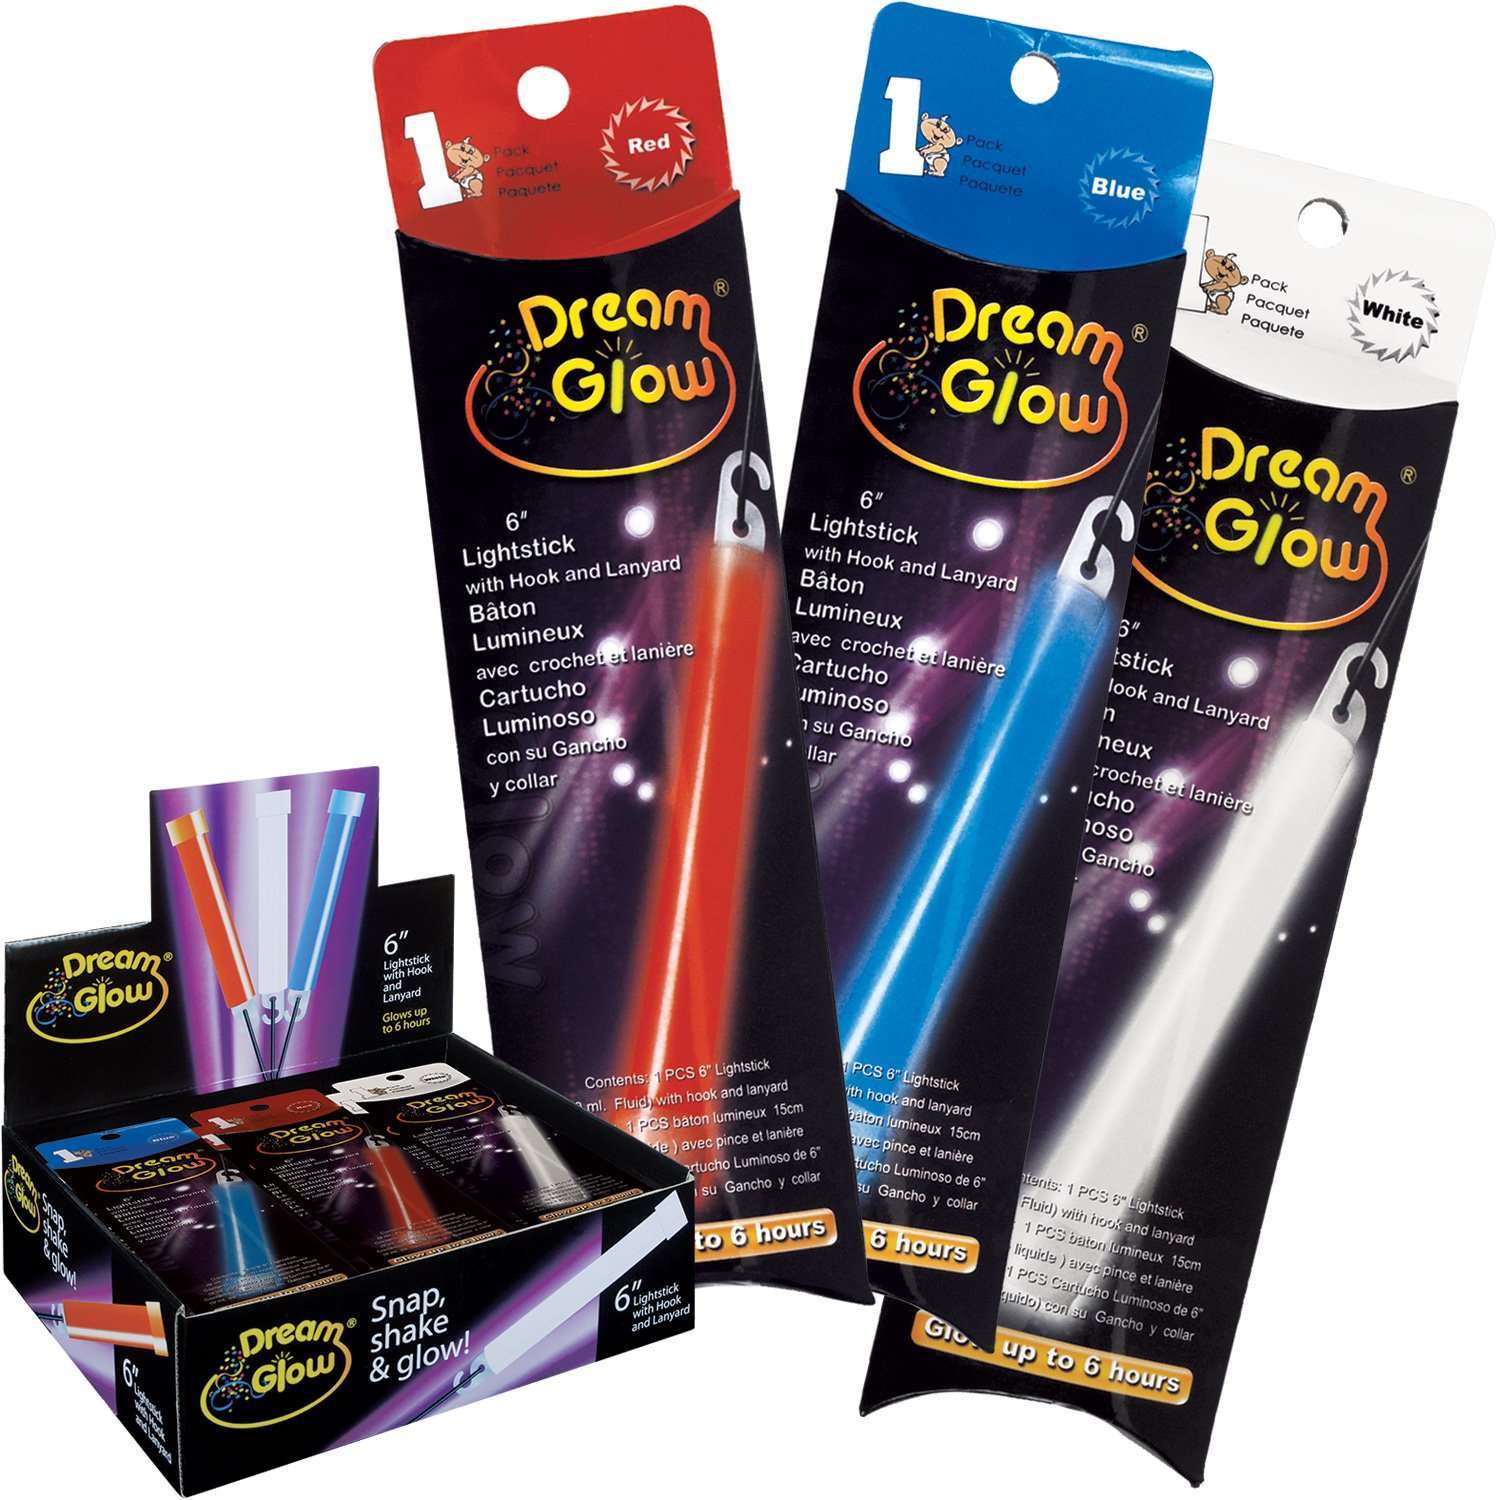 Dream Glow Sticks In Red, White or Blue